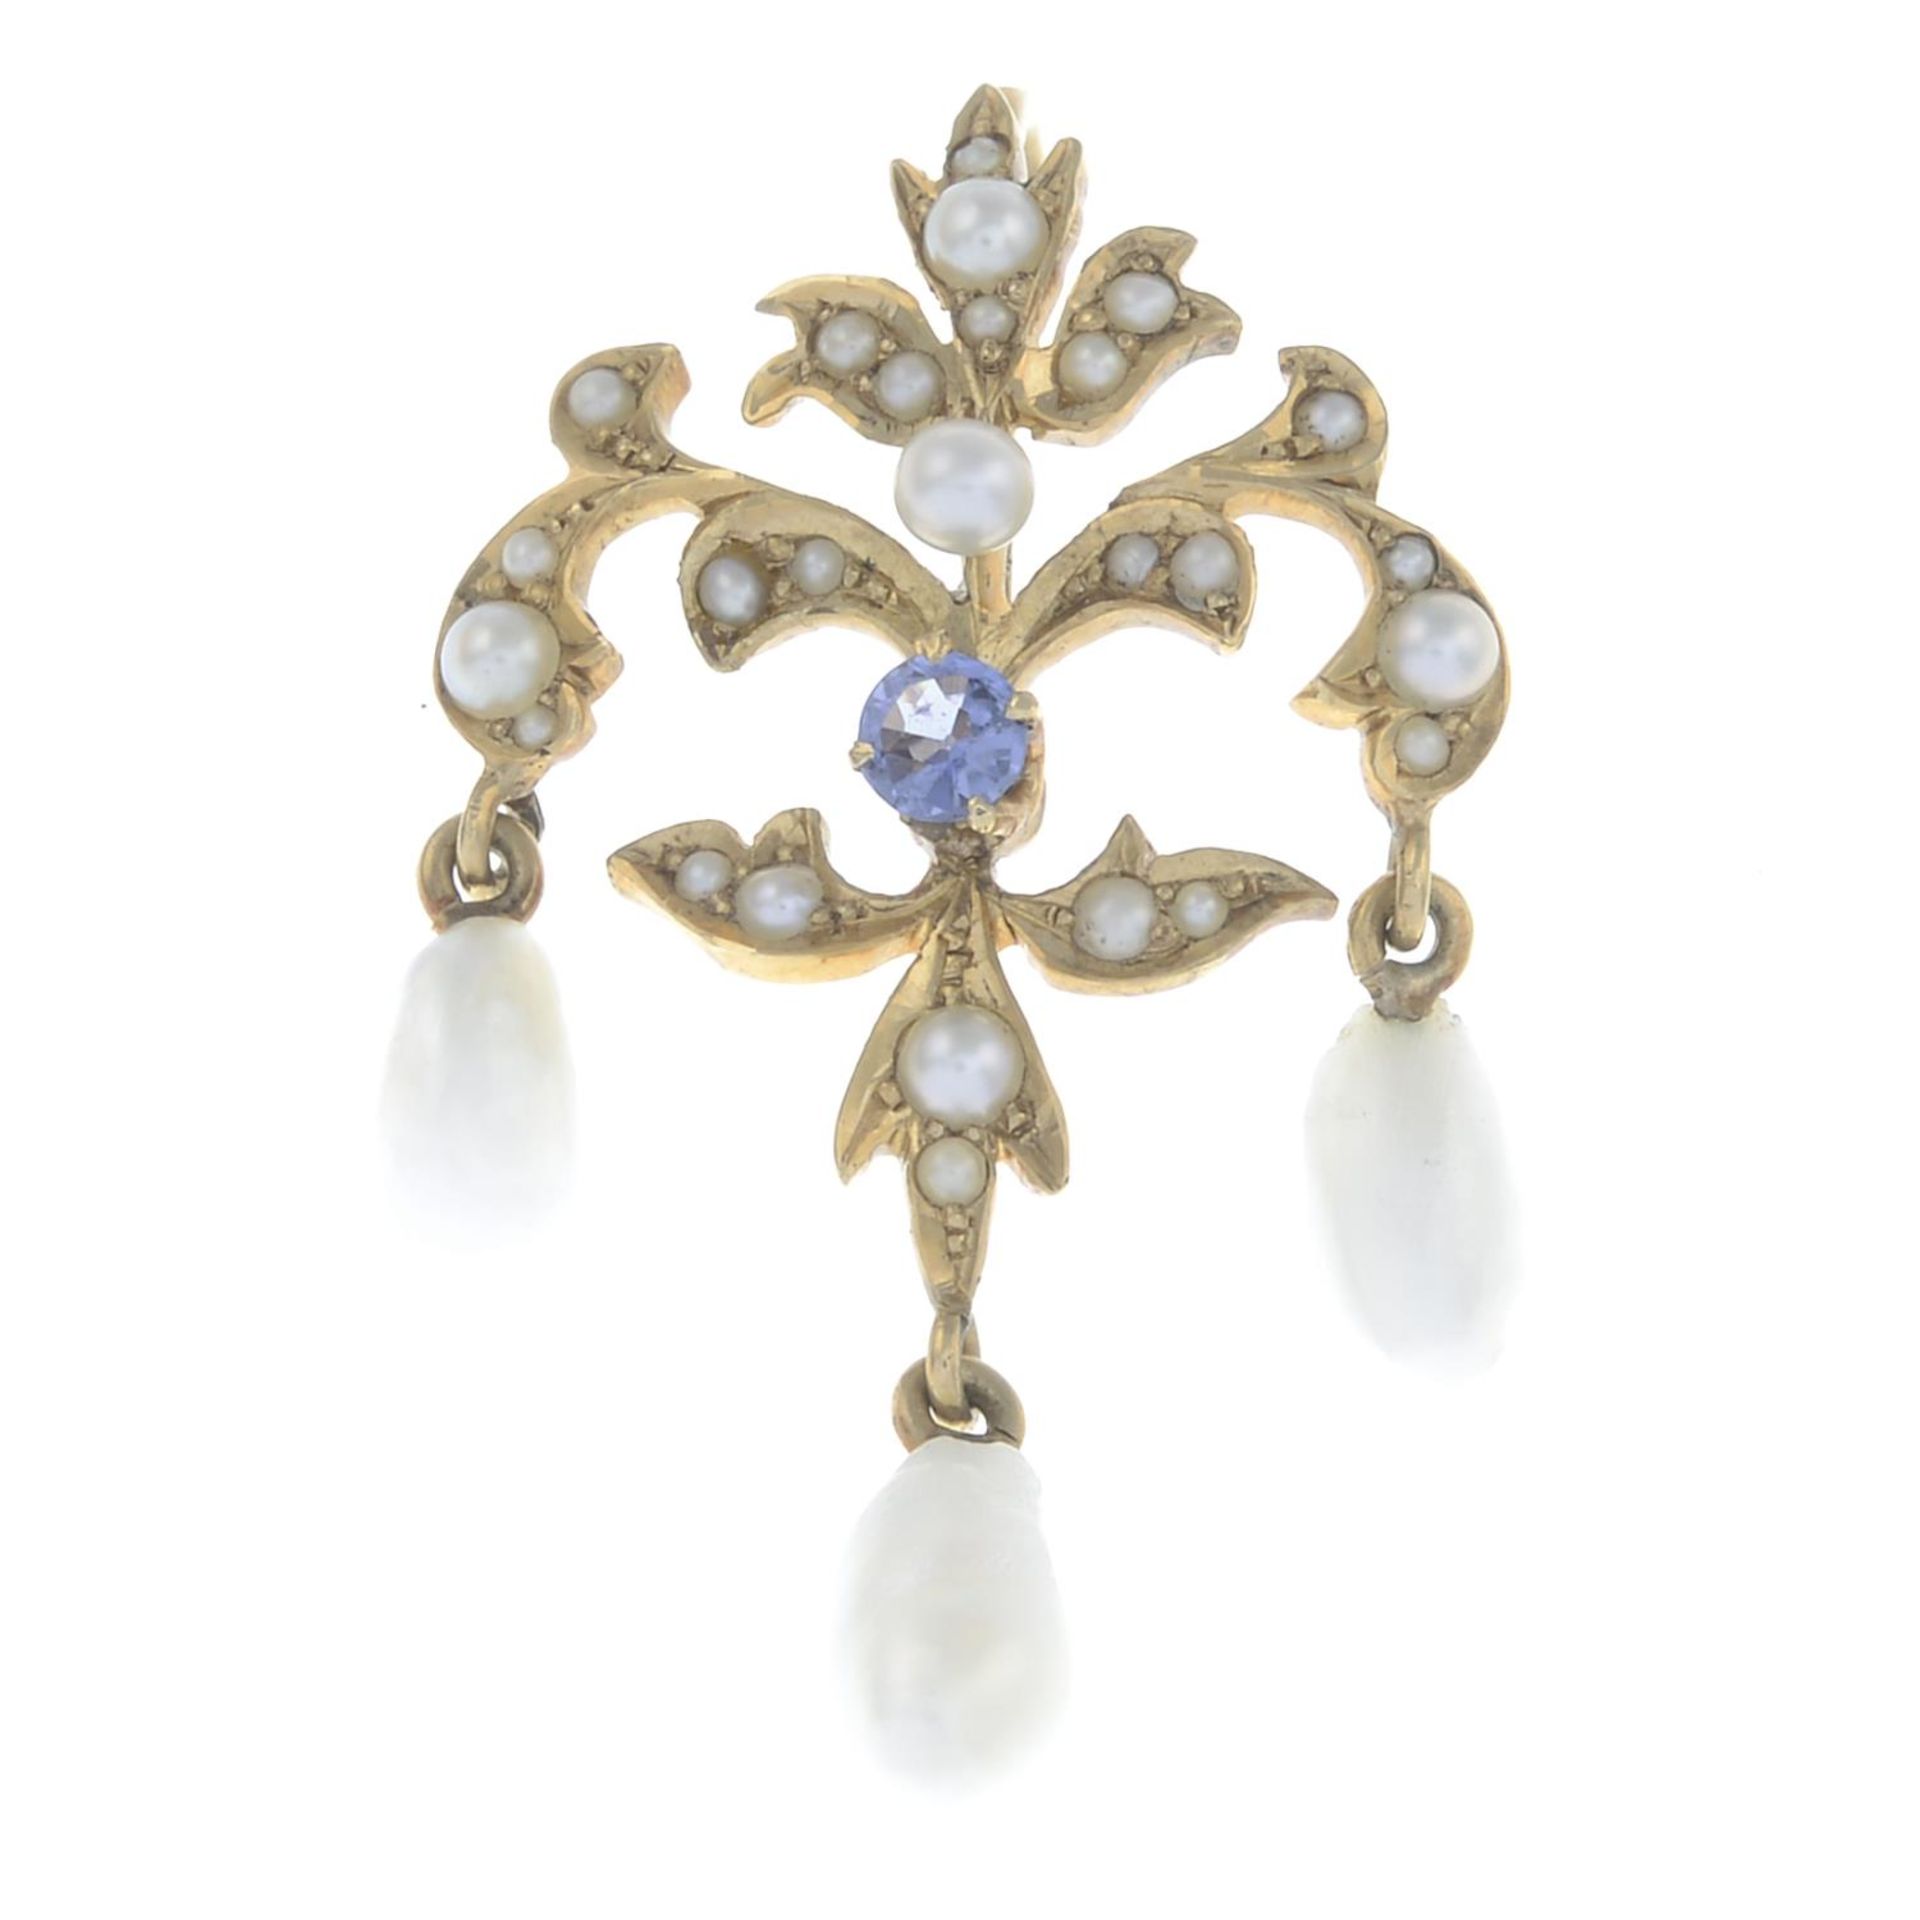 An early 20th century 14ct gold, sapphire, pearl and split pearl pendant.Stamped 14.